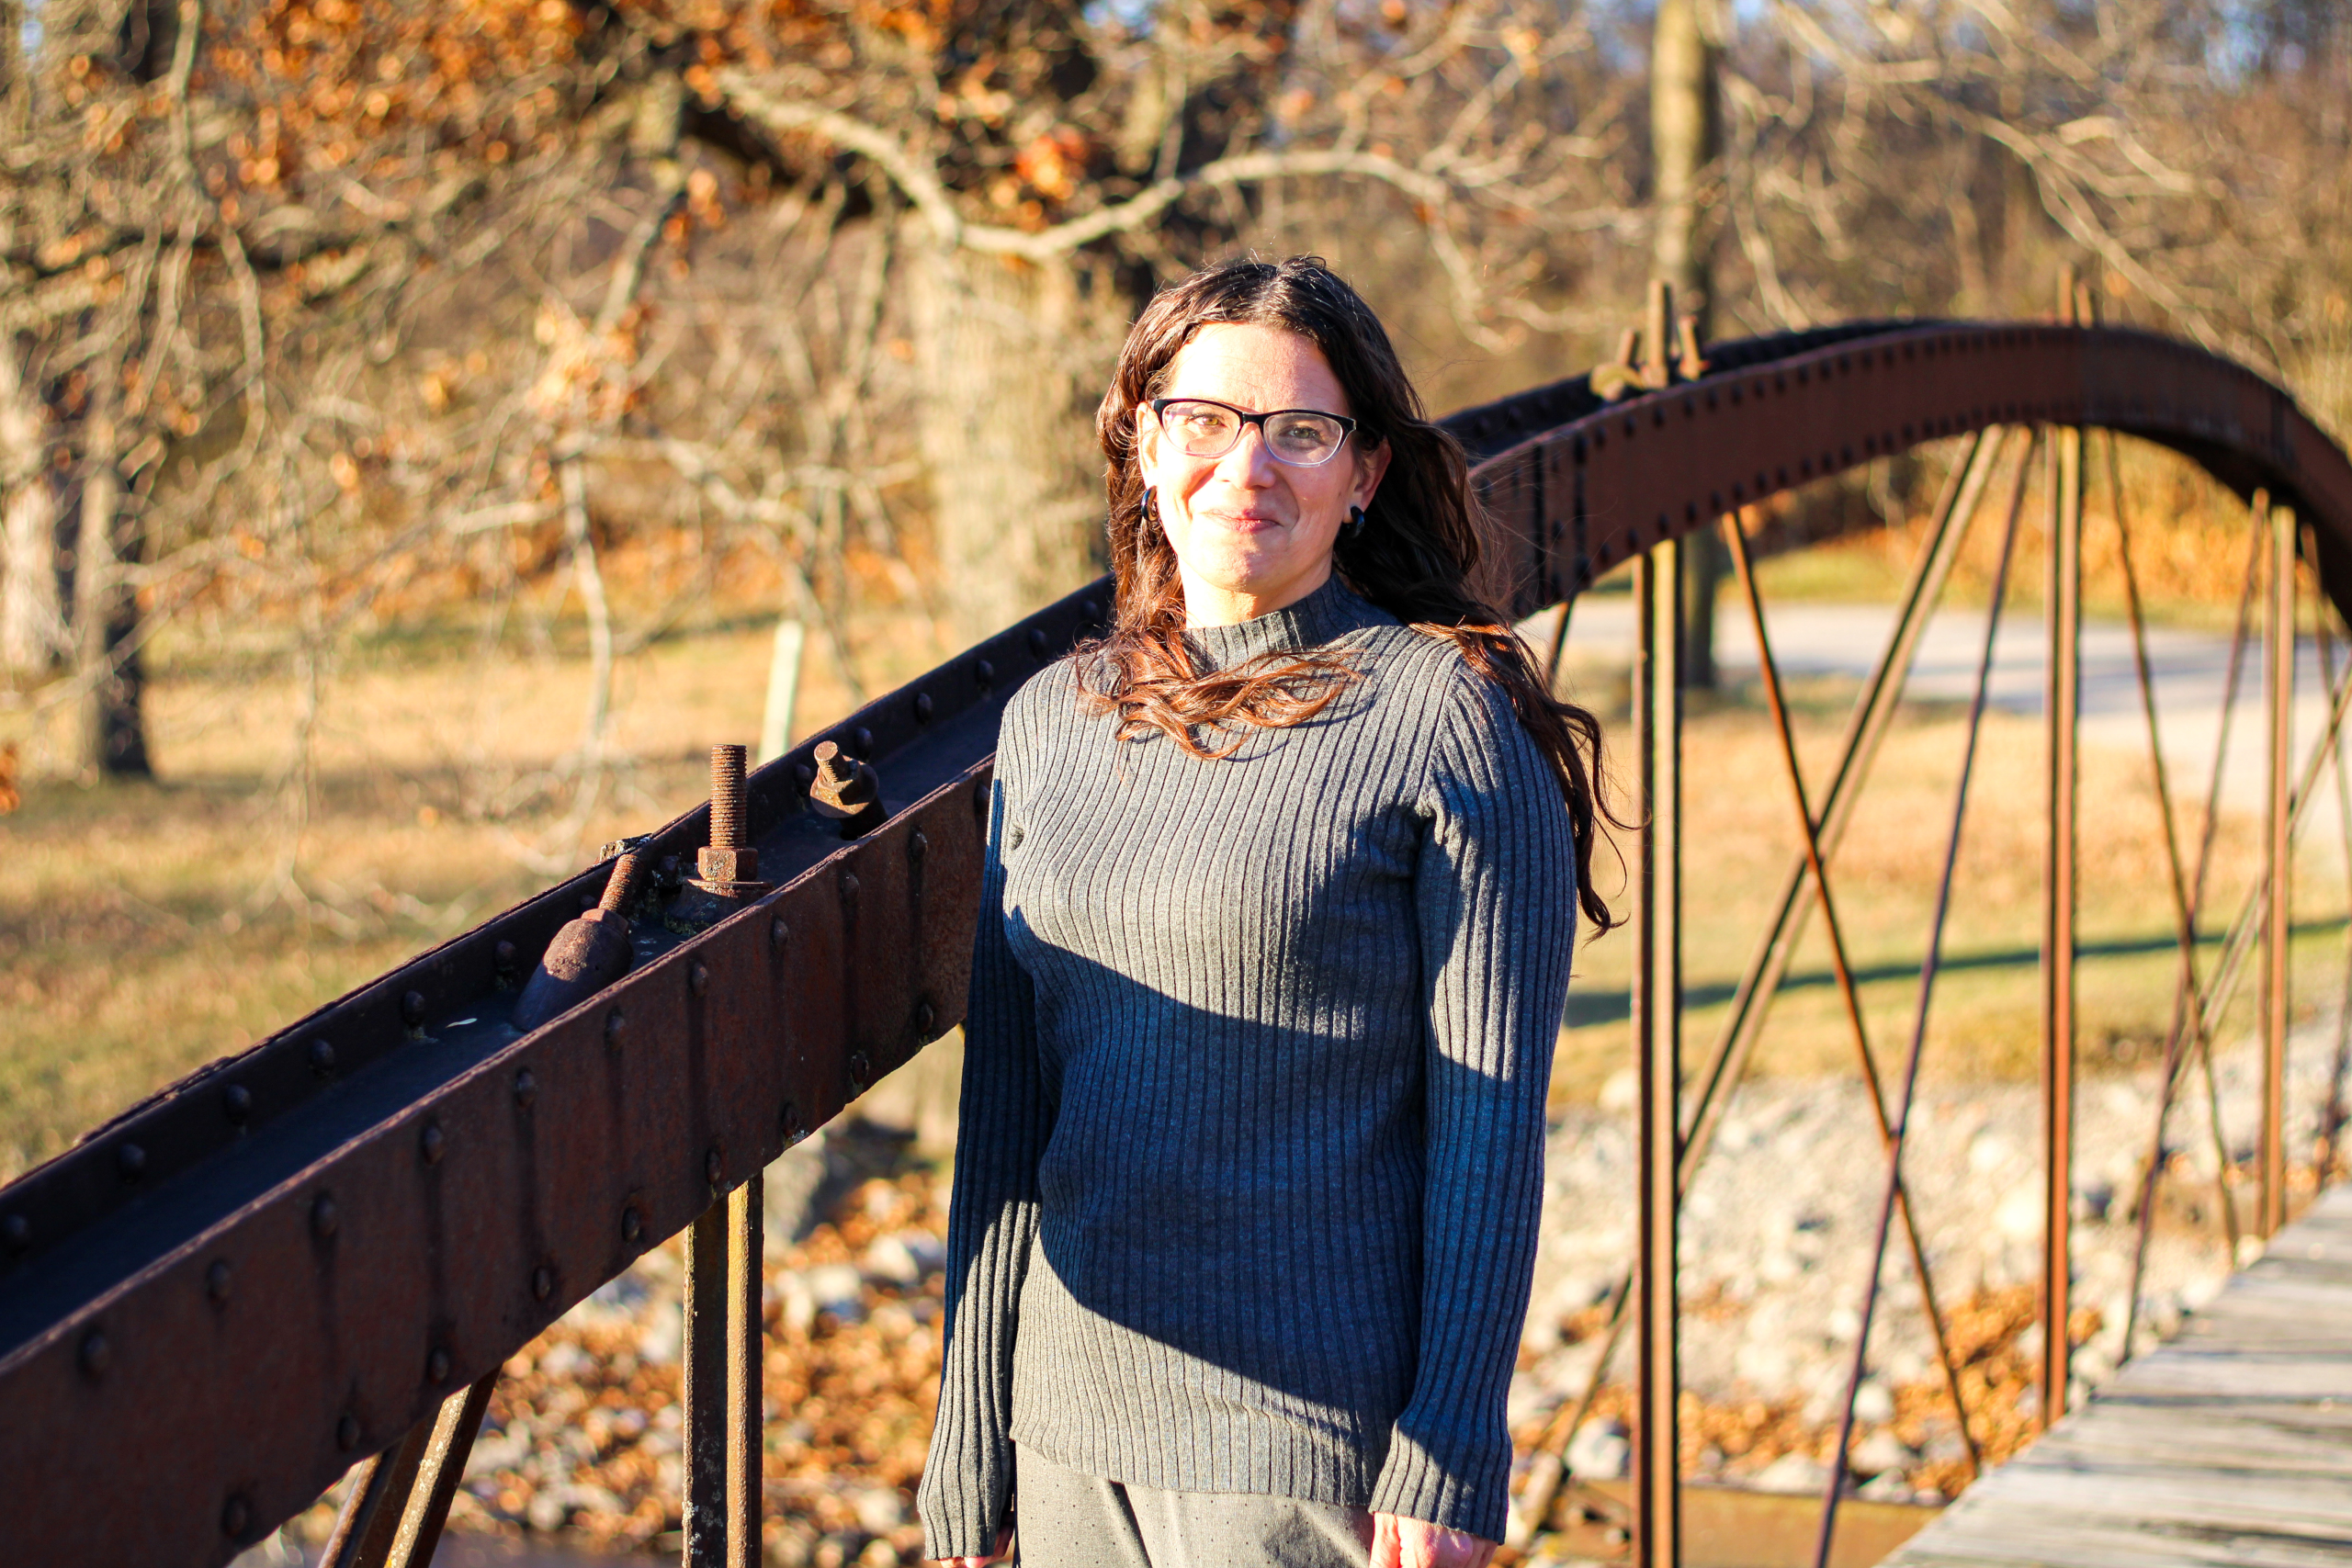 Mandi standing on a bridge. She's wearing a gray sweater and smiling, and her hair is blowing slightly to the right. It's autumn and there are orange leaves in the background.